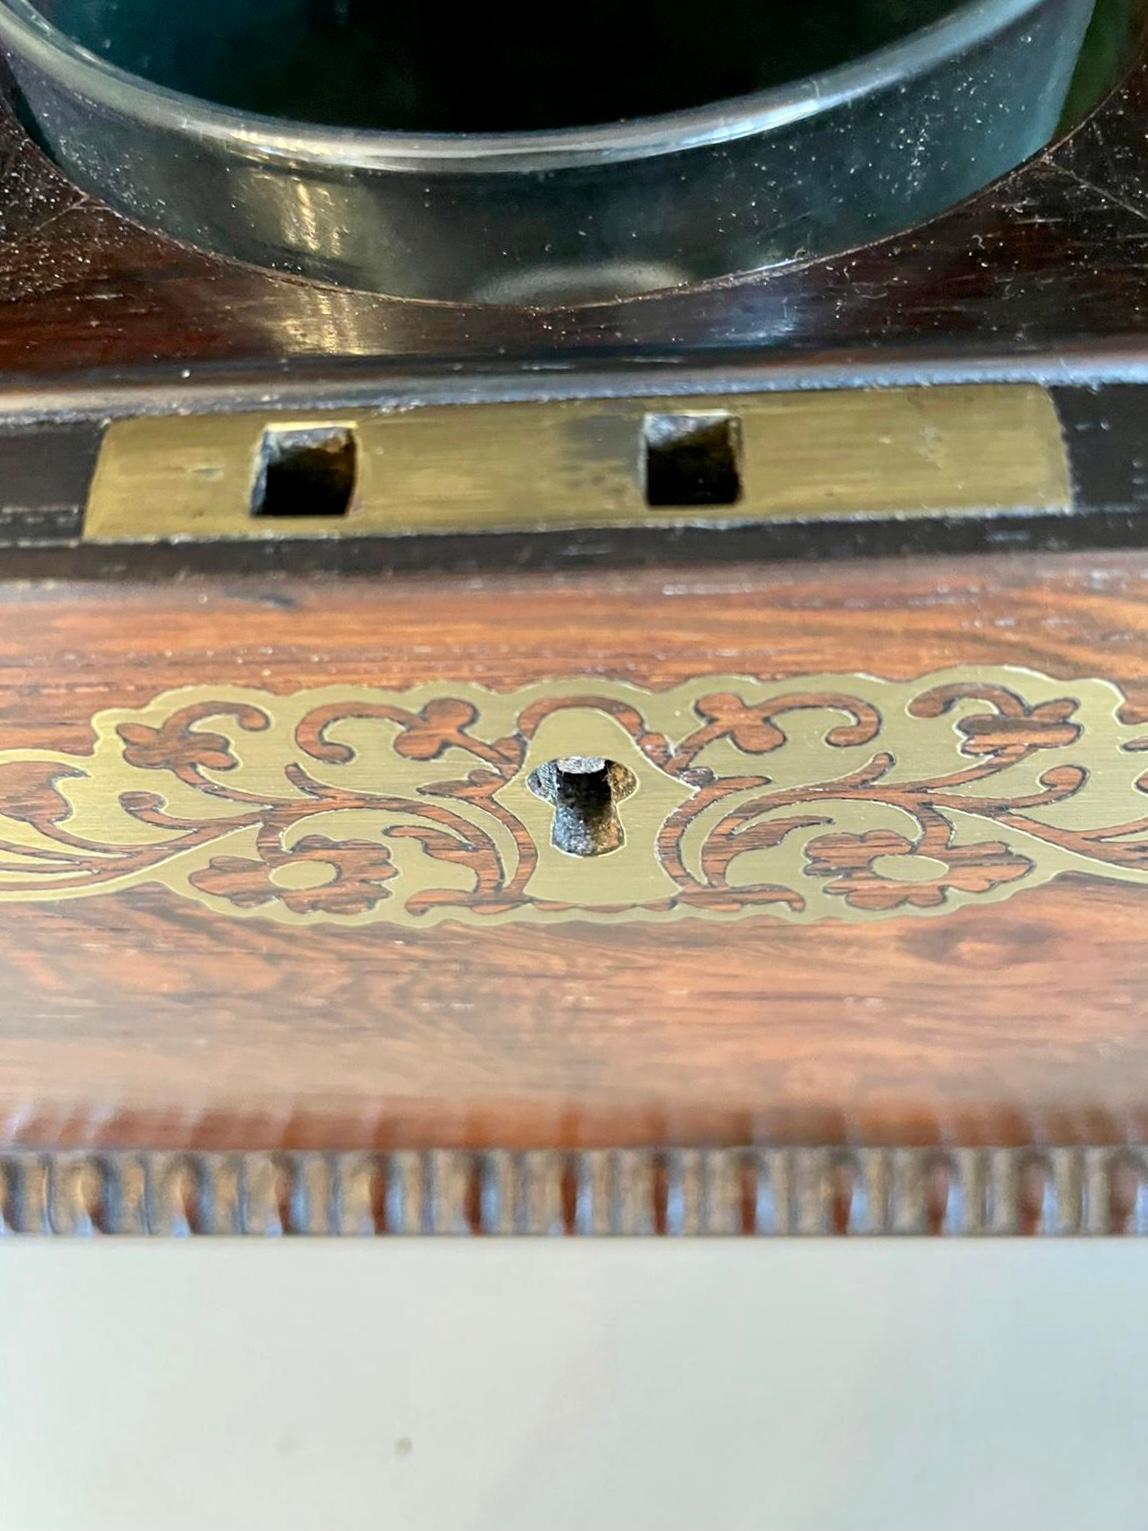 Fine antique Regency inlaid brass rosewood tea caddy having a spectacular inlaid brass top and carved moulded rosewood edge, lift up lid opening to reveal a fitted interior with the original lift out tea caddies, inlaid brass to the front with a